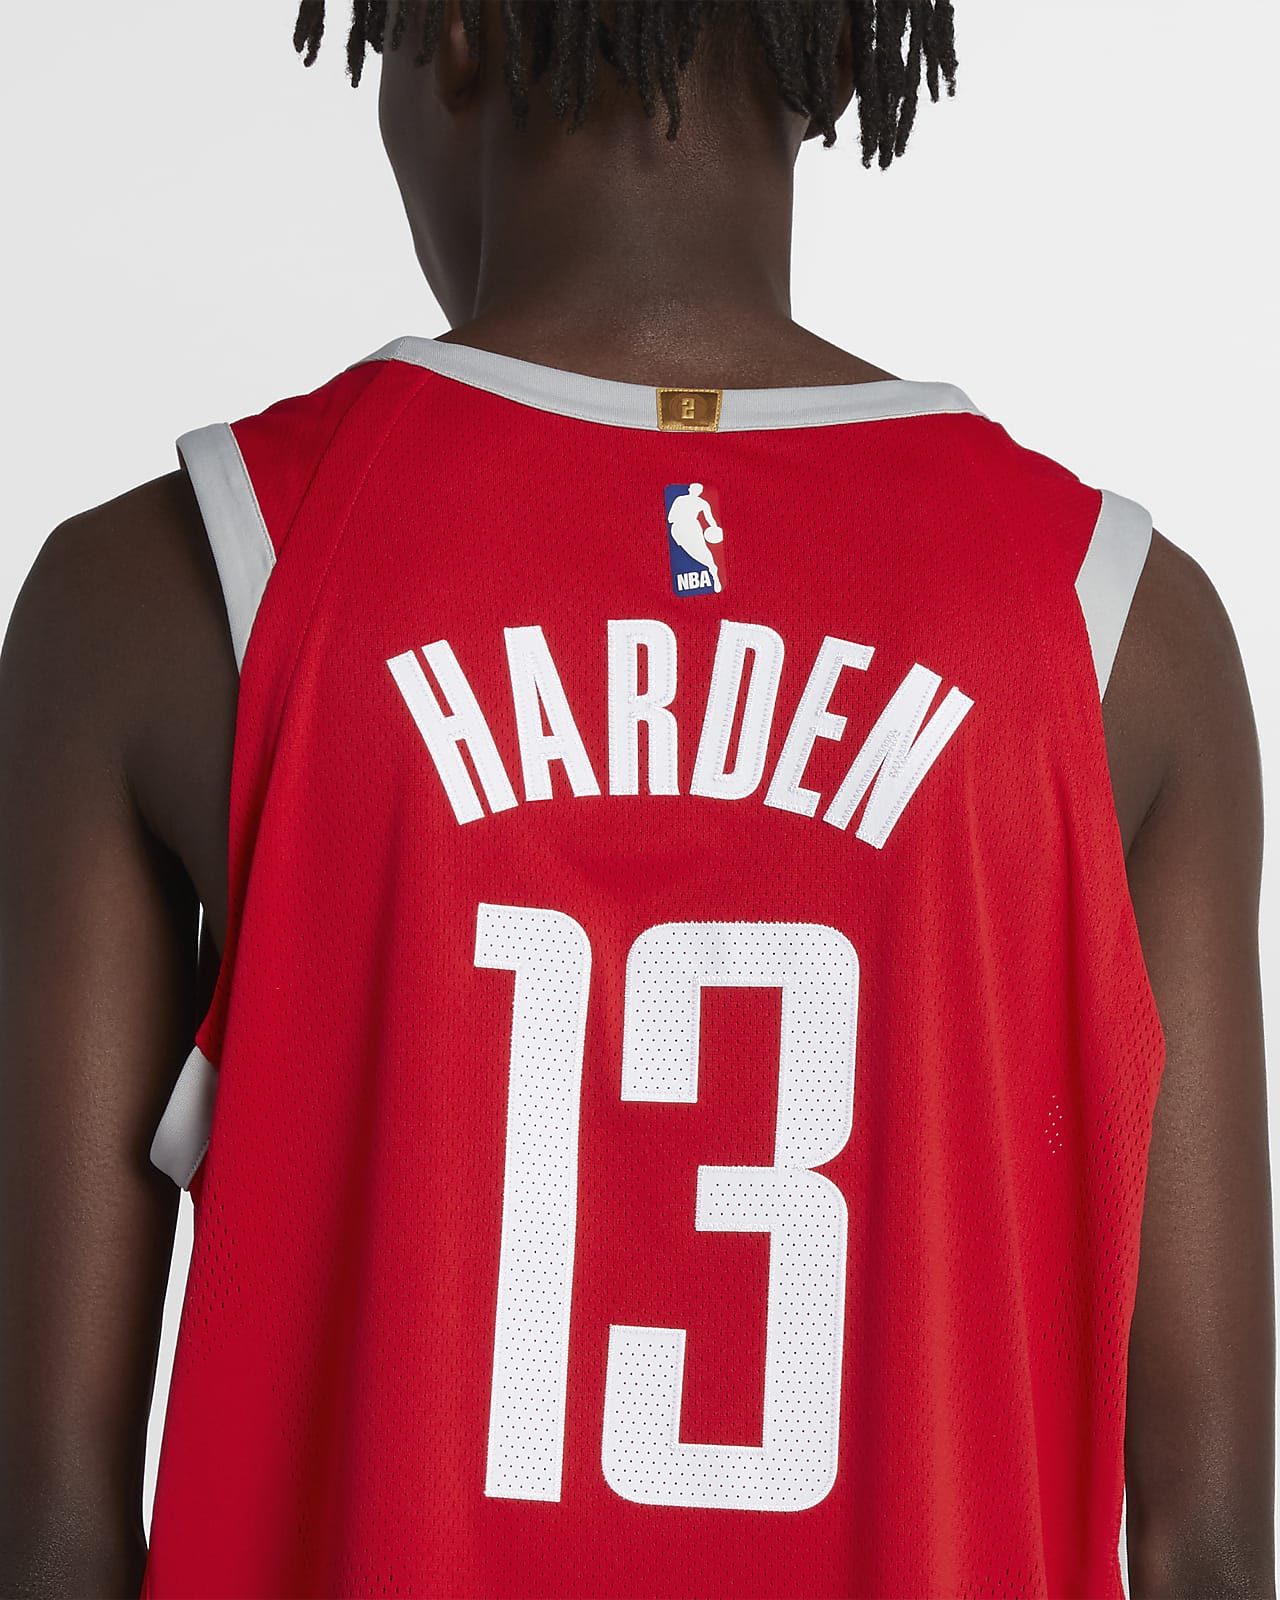 rockets authentic jersey